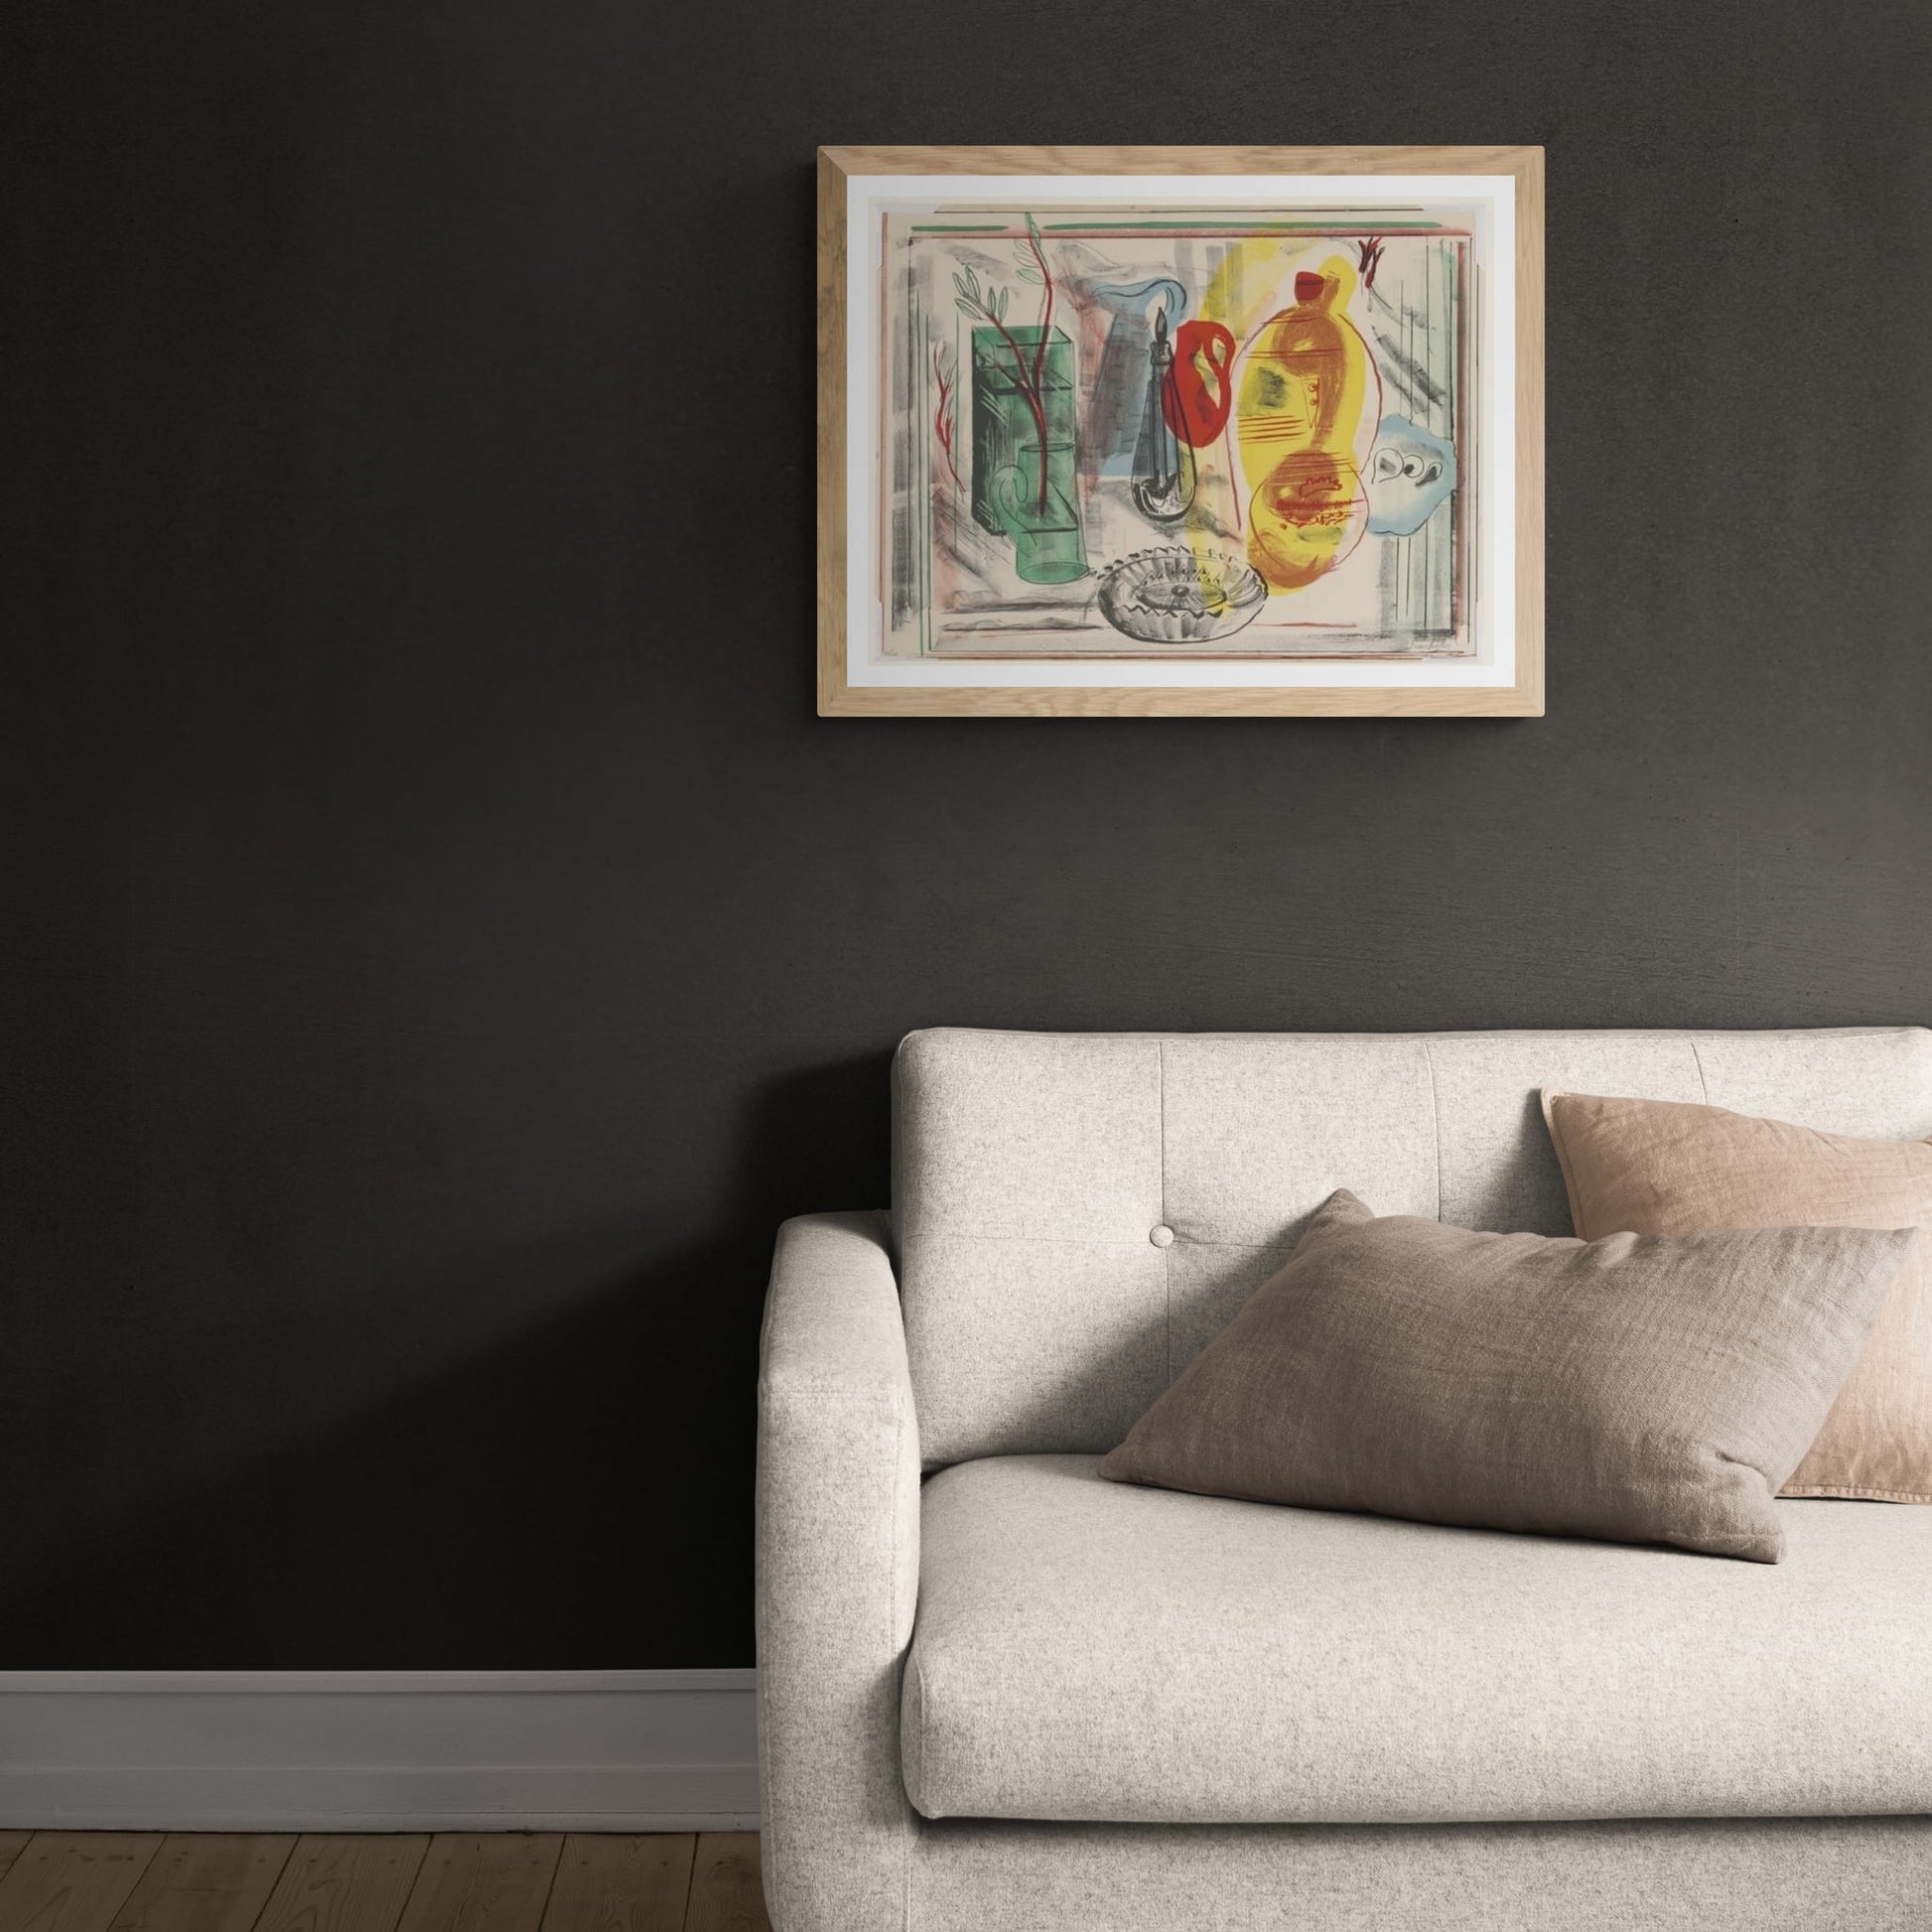 Framed print of a still life arrangement of jugs, vases and vessels in jewel like colours, hanging above cream couch.